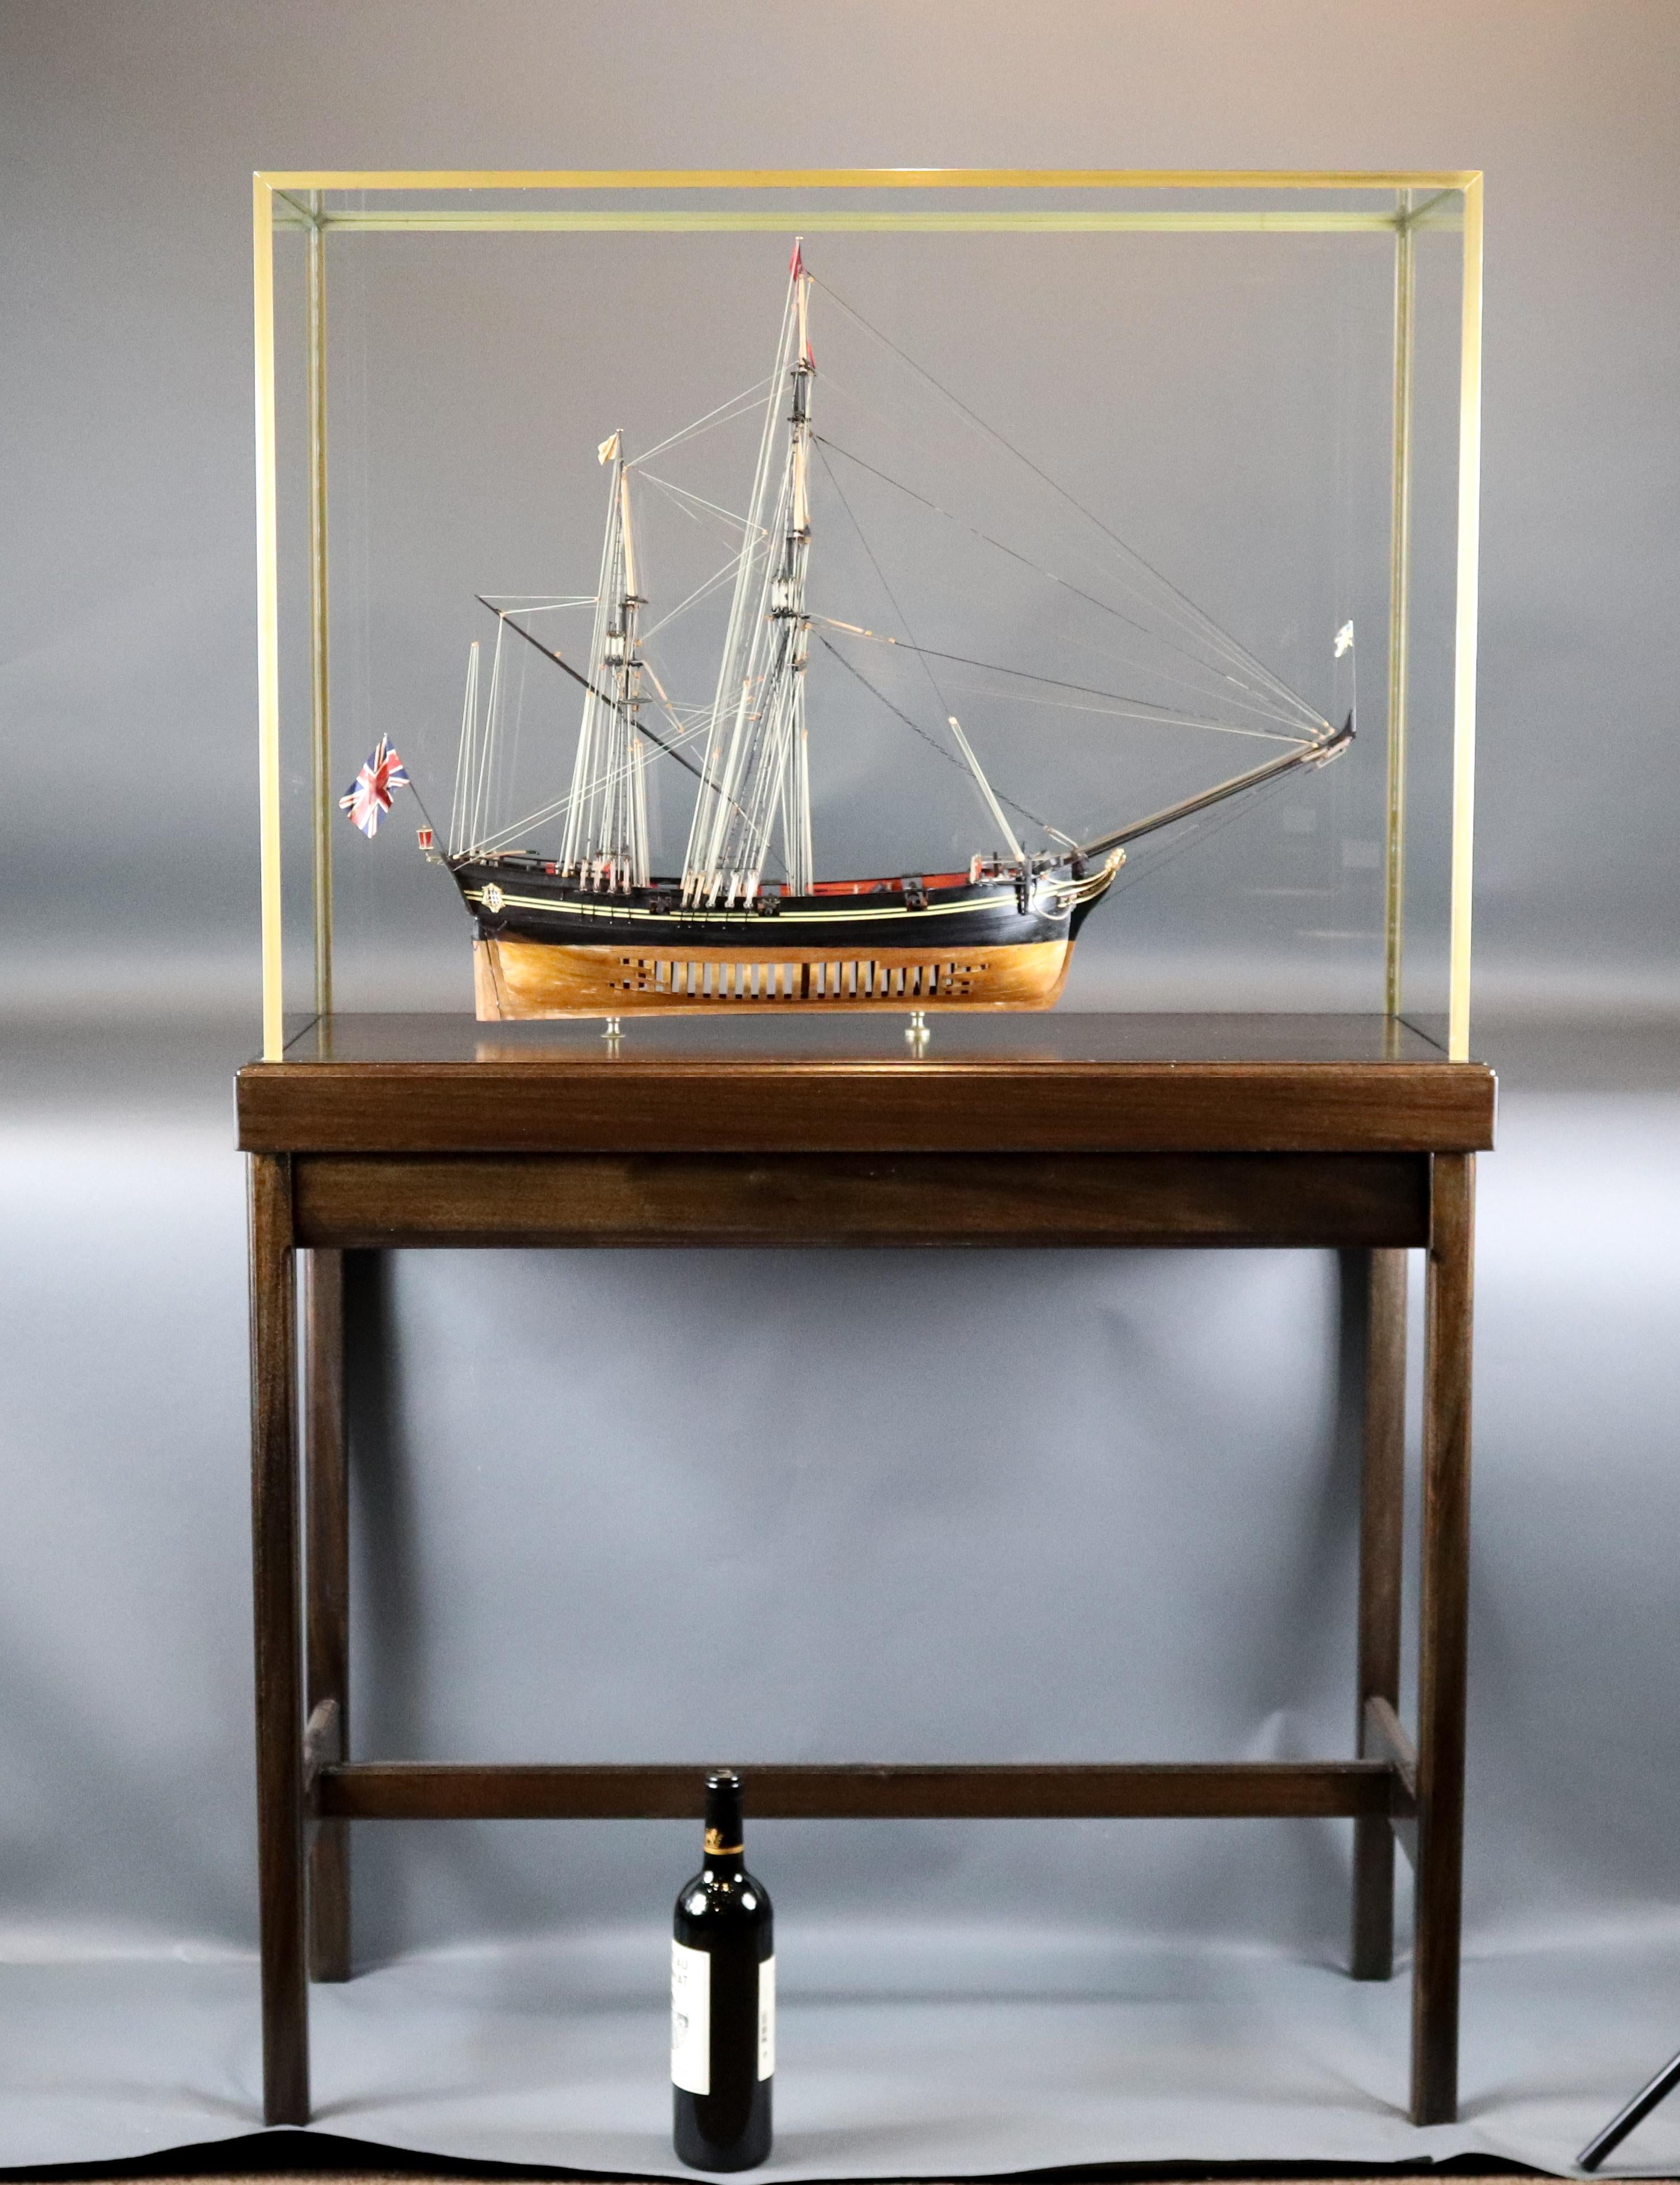 Outstanding model by noted ship model builder William Hitchcock of the bomb ketch Spitfire. Six cannon are rigged to the deck with block and tackle. A large turret gun is rigged to the main deck along with tools and powder buckets. Details include